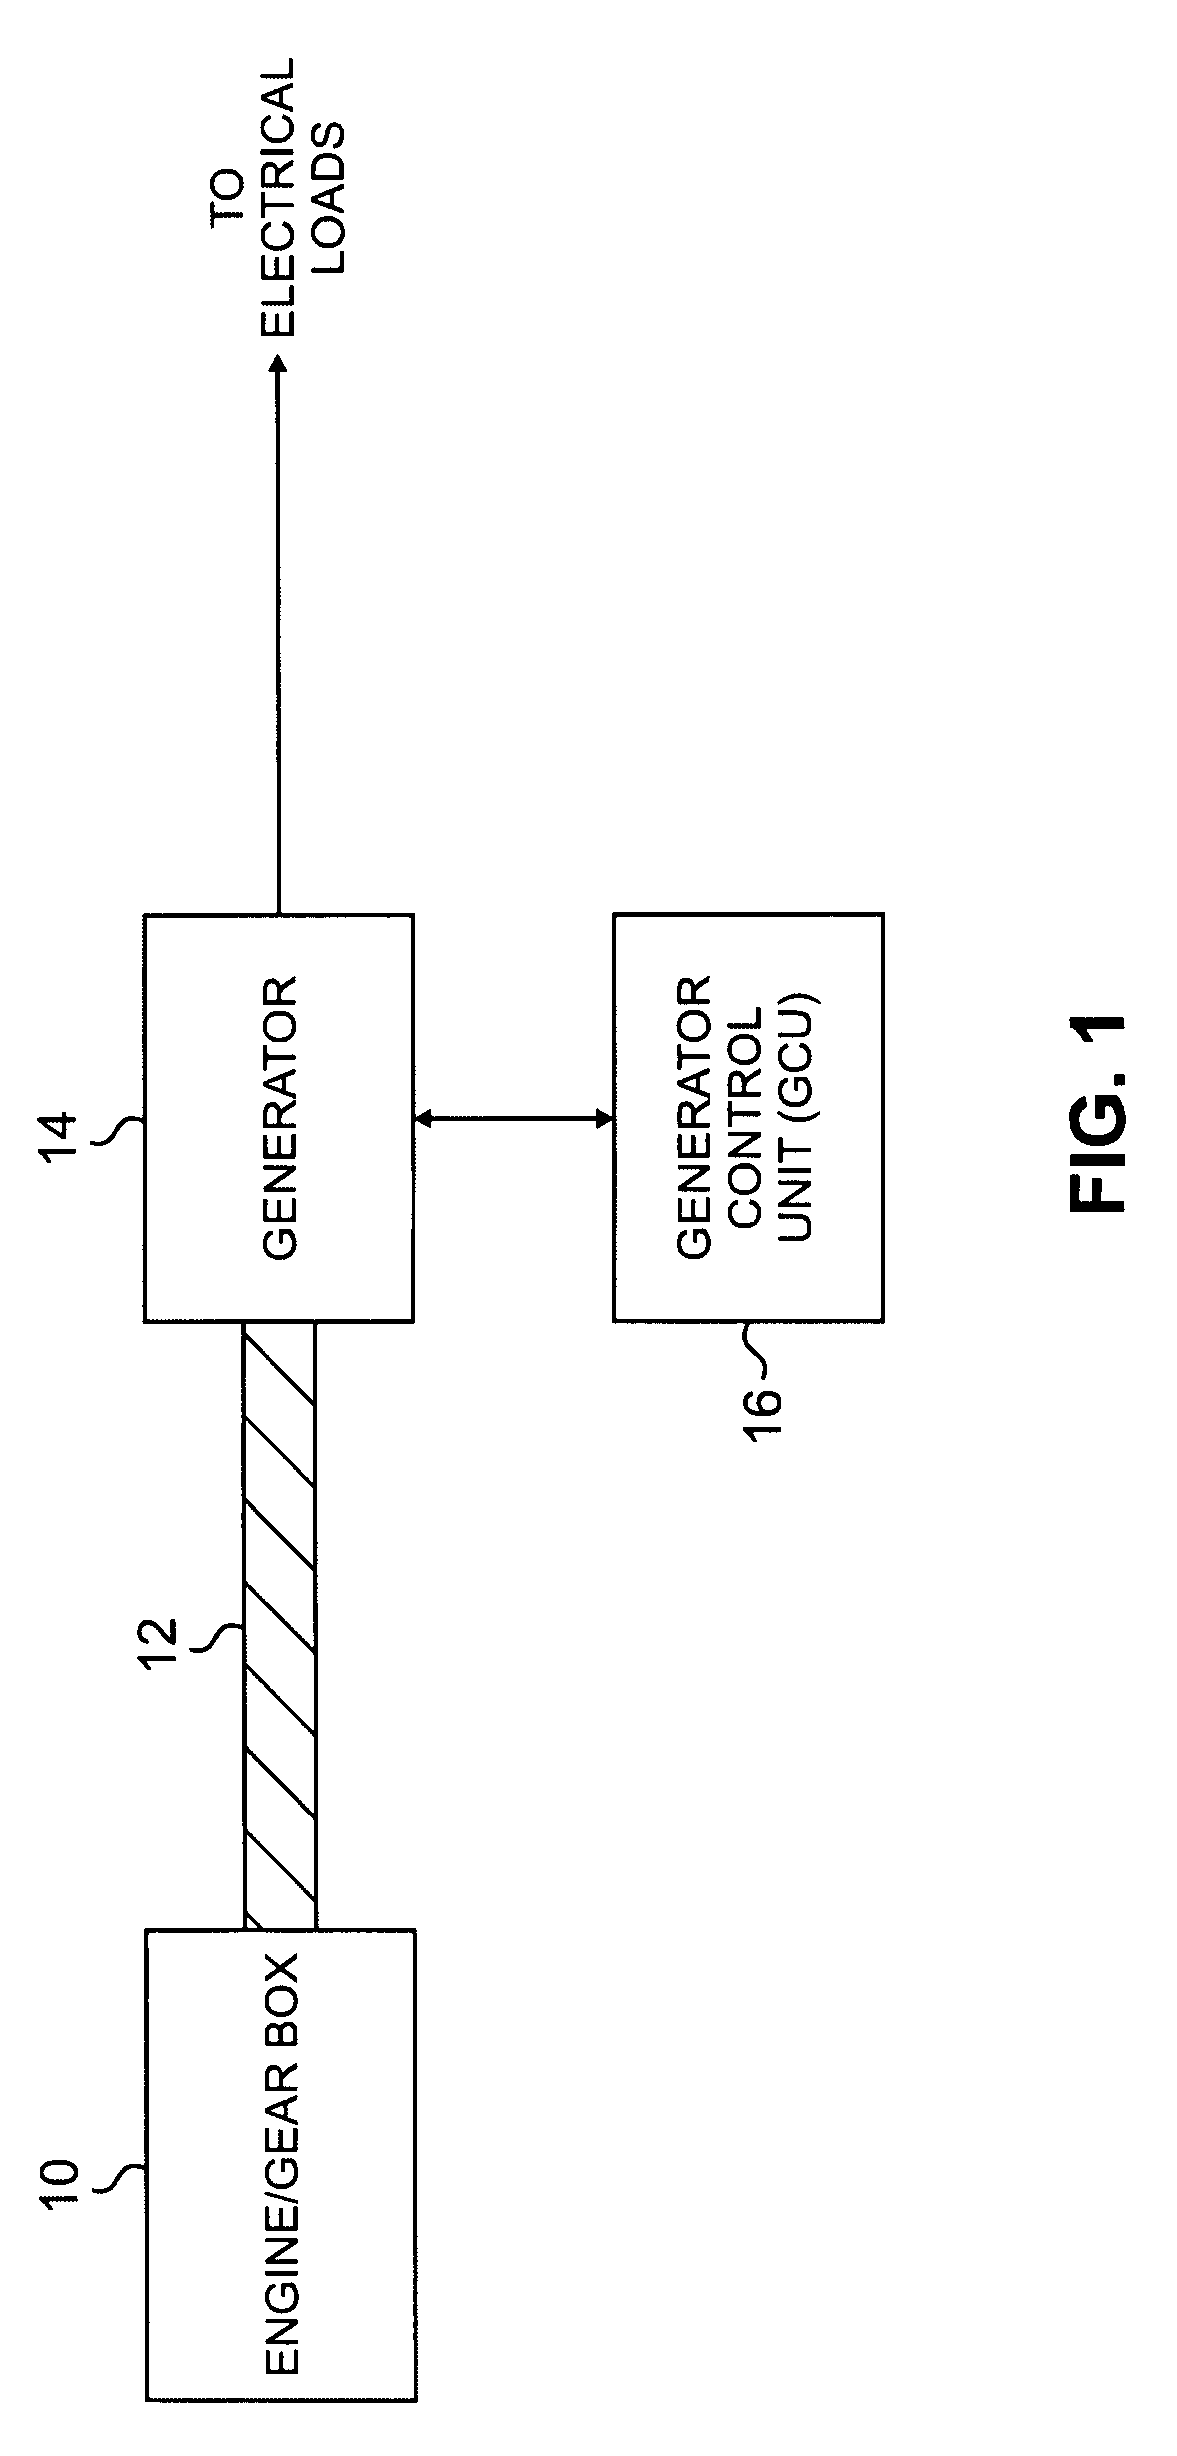 Active damping for synchronous generator torsional oscillations